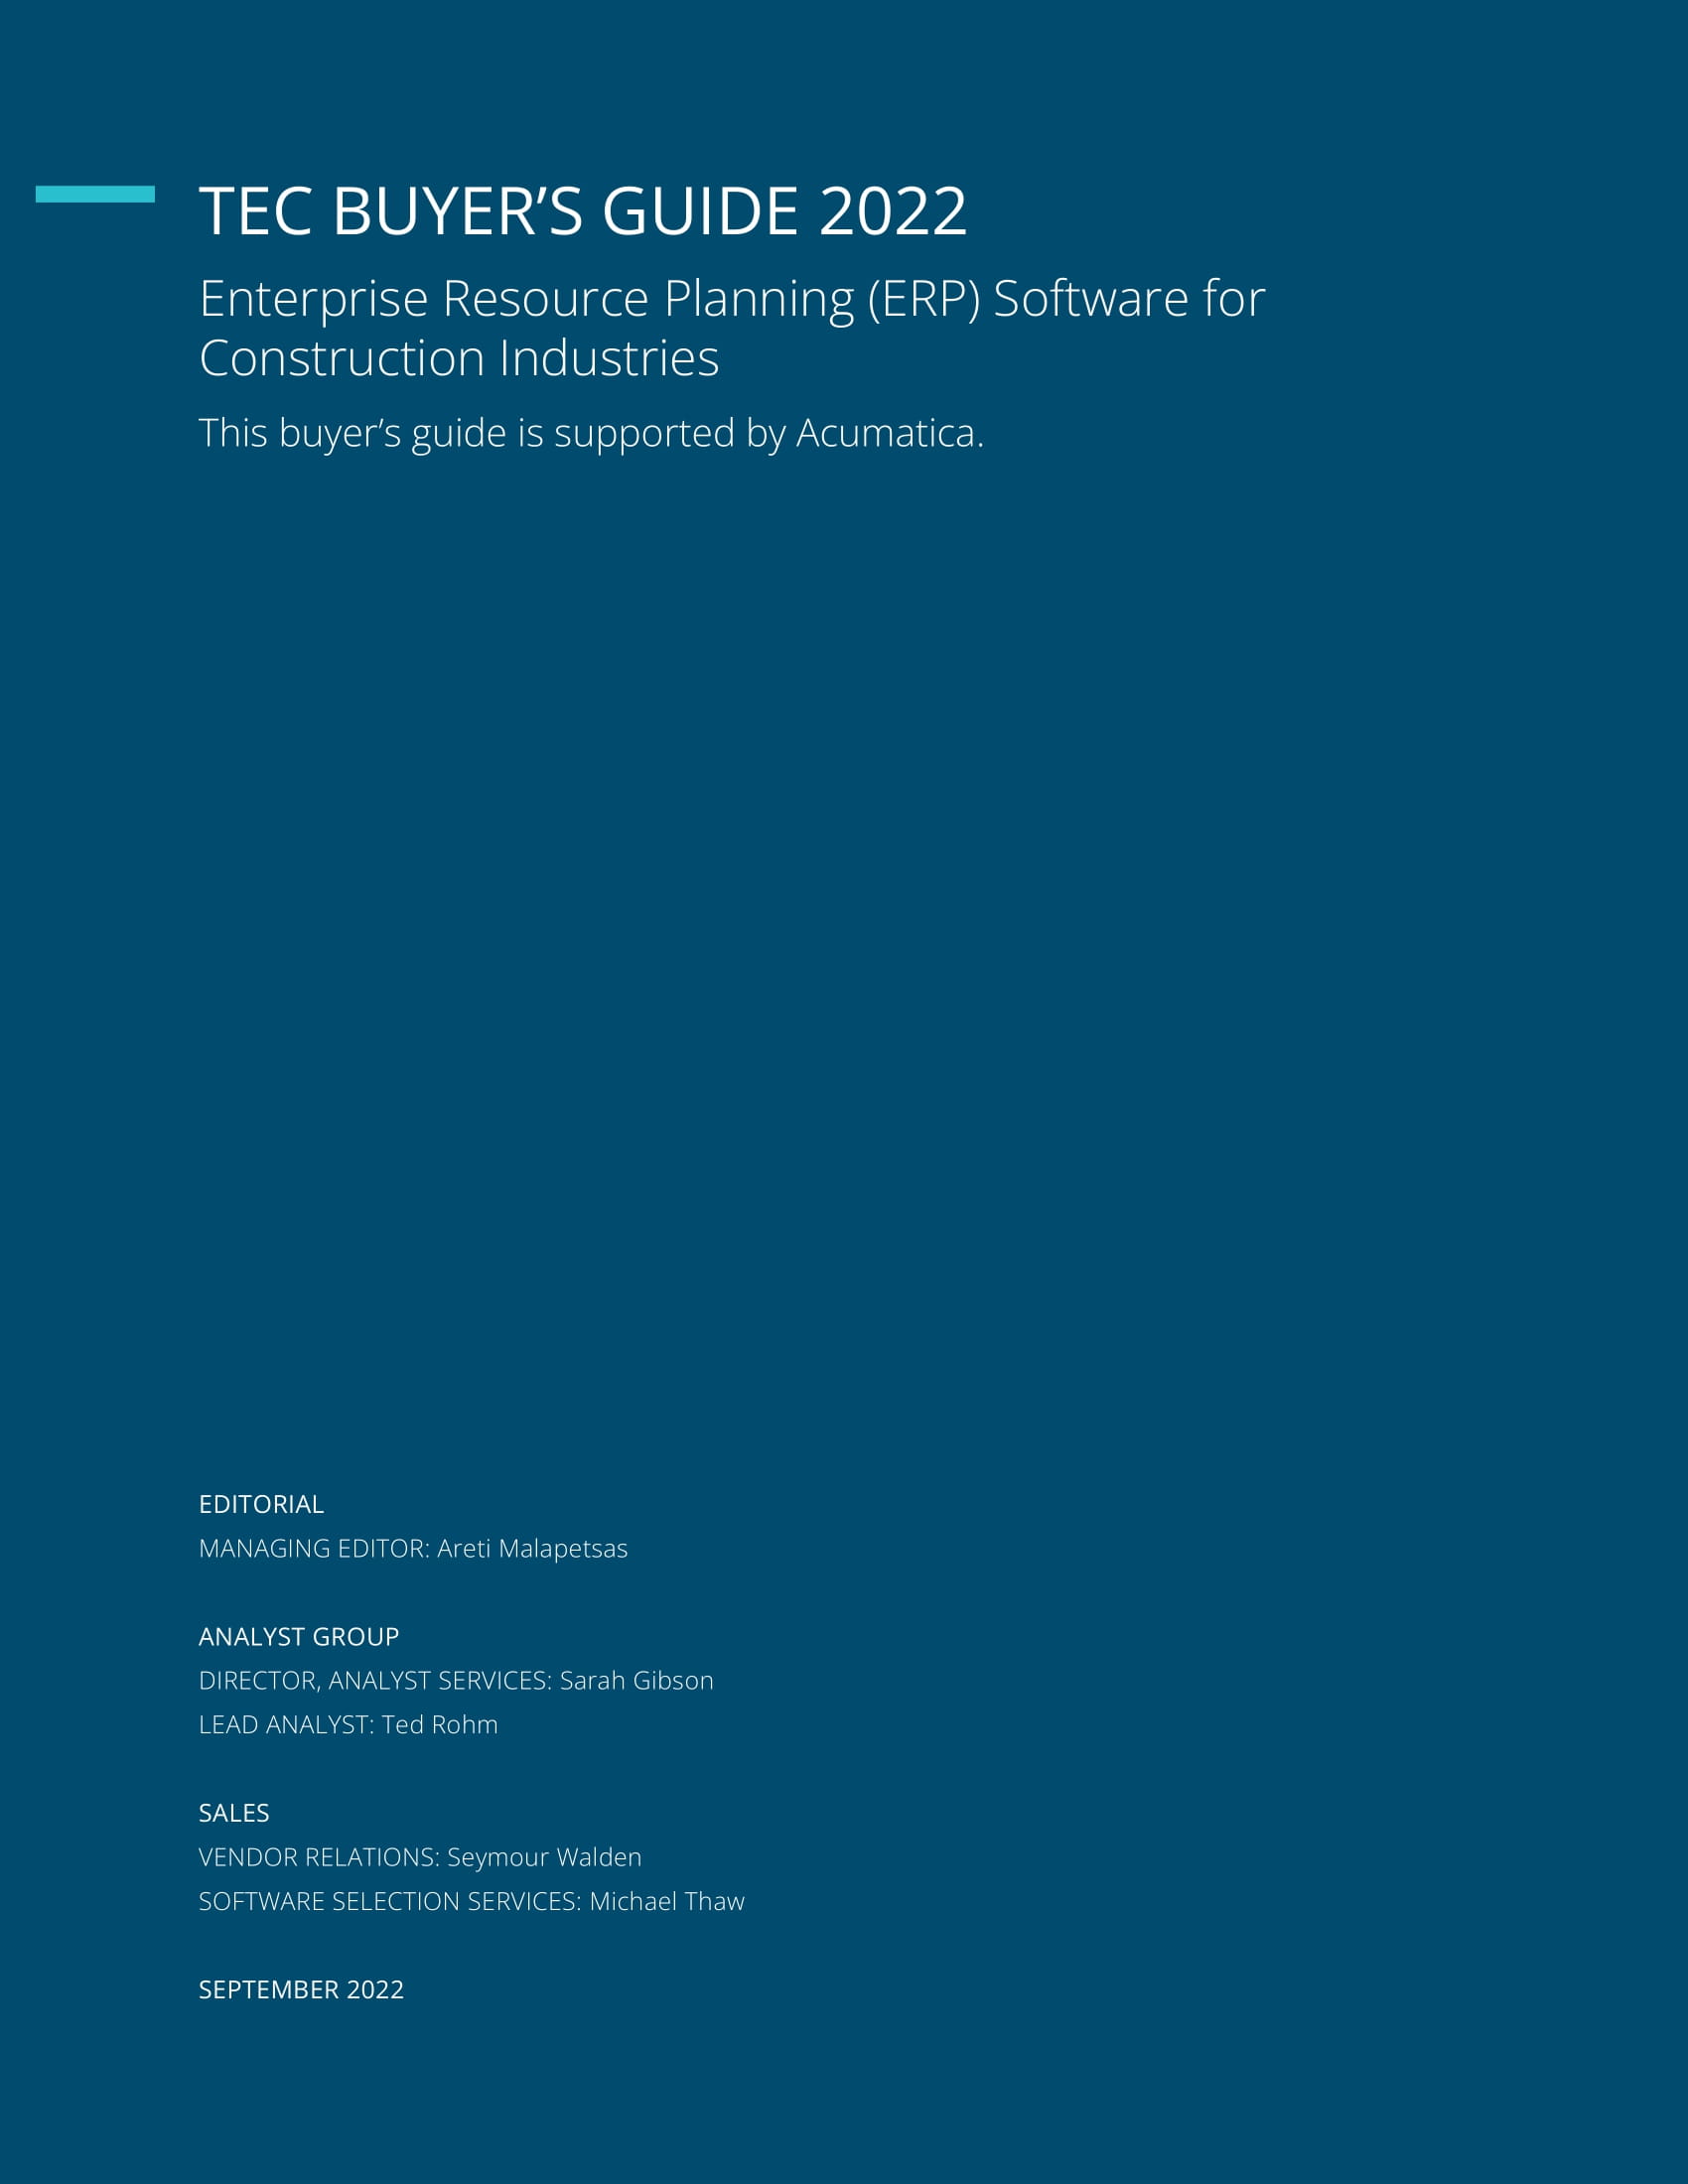 The ERP Software for Construction Industries Buyer’s Guide by Technology Evaluation Centers (TEC) features Acumatica., page 1